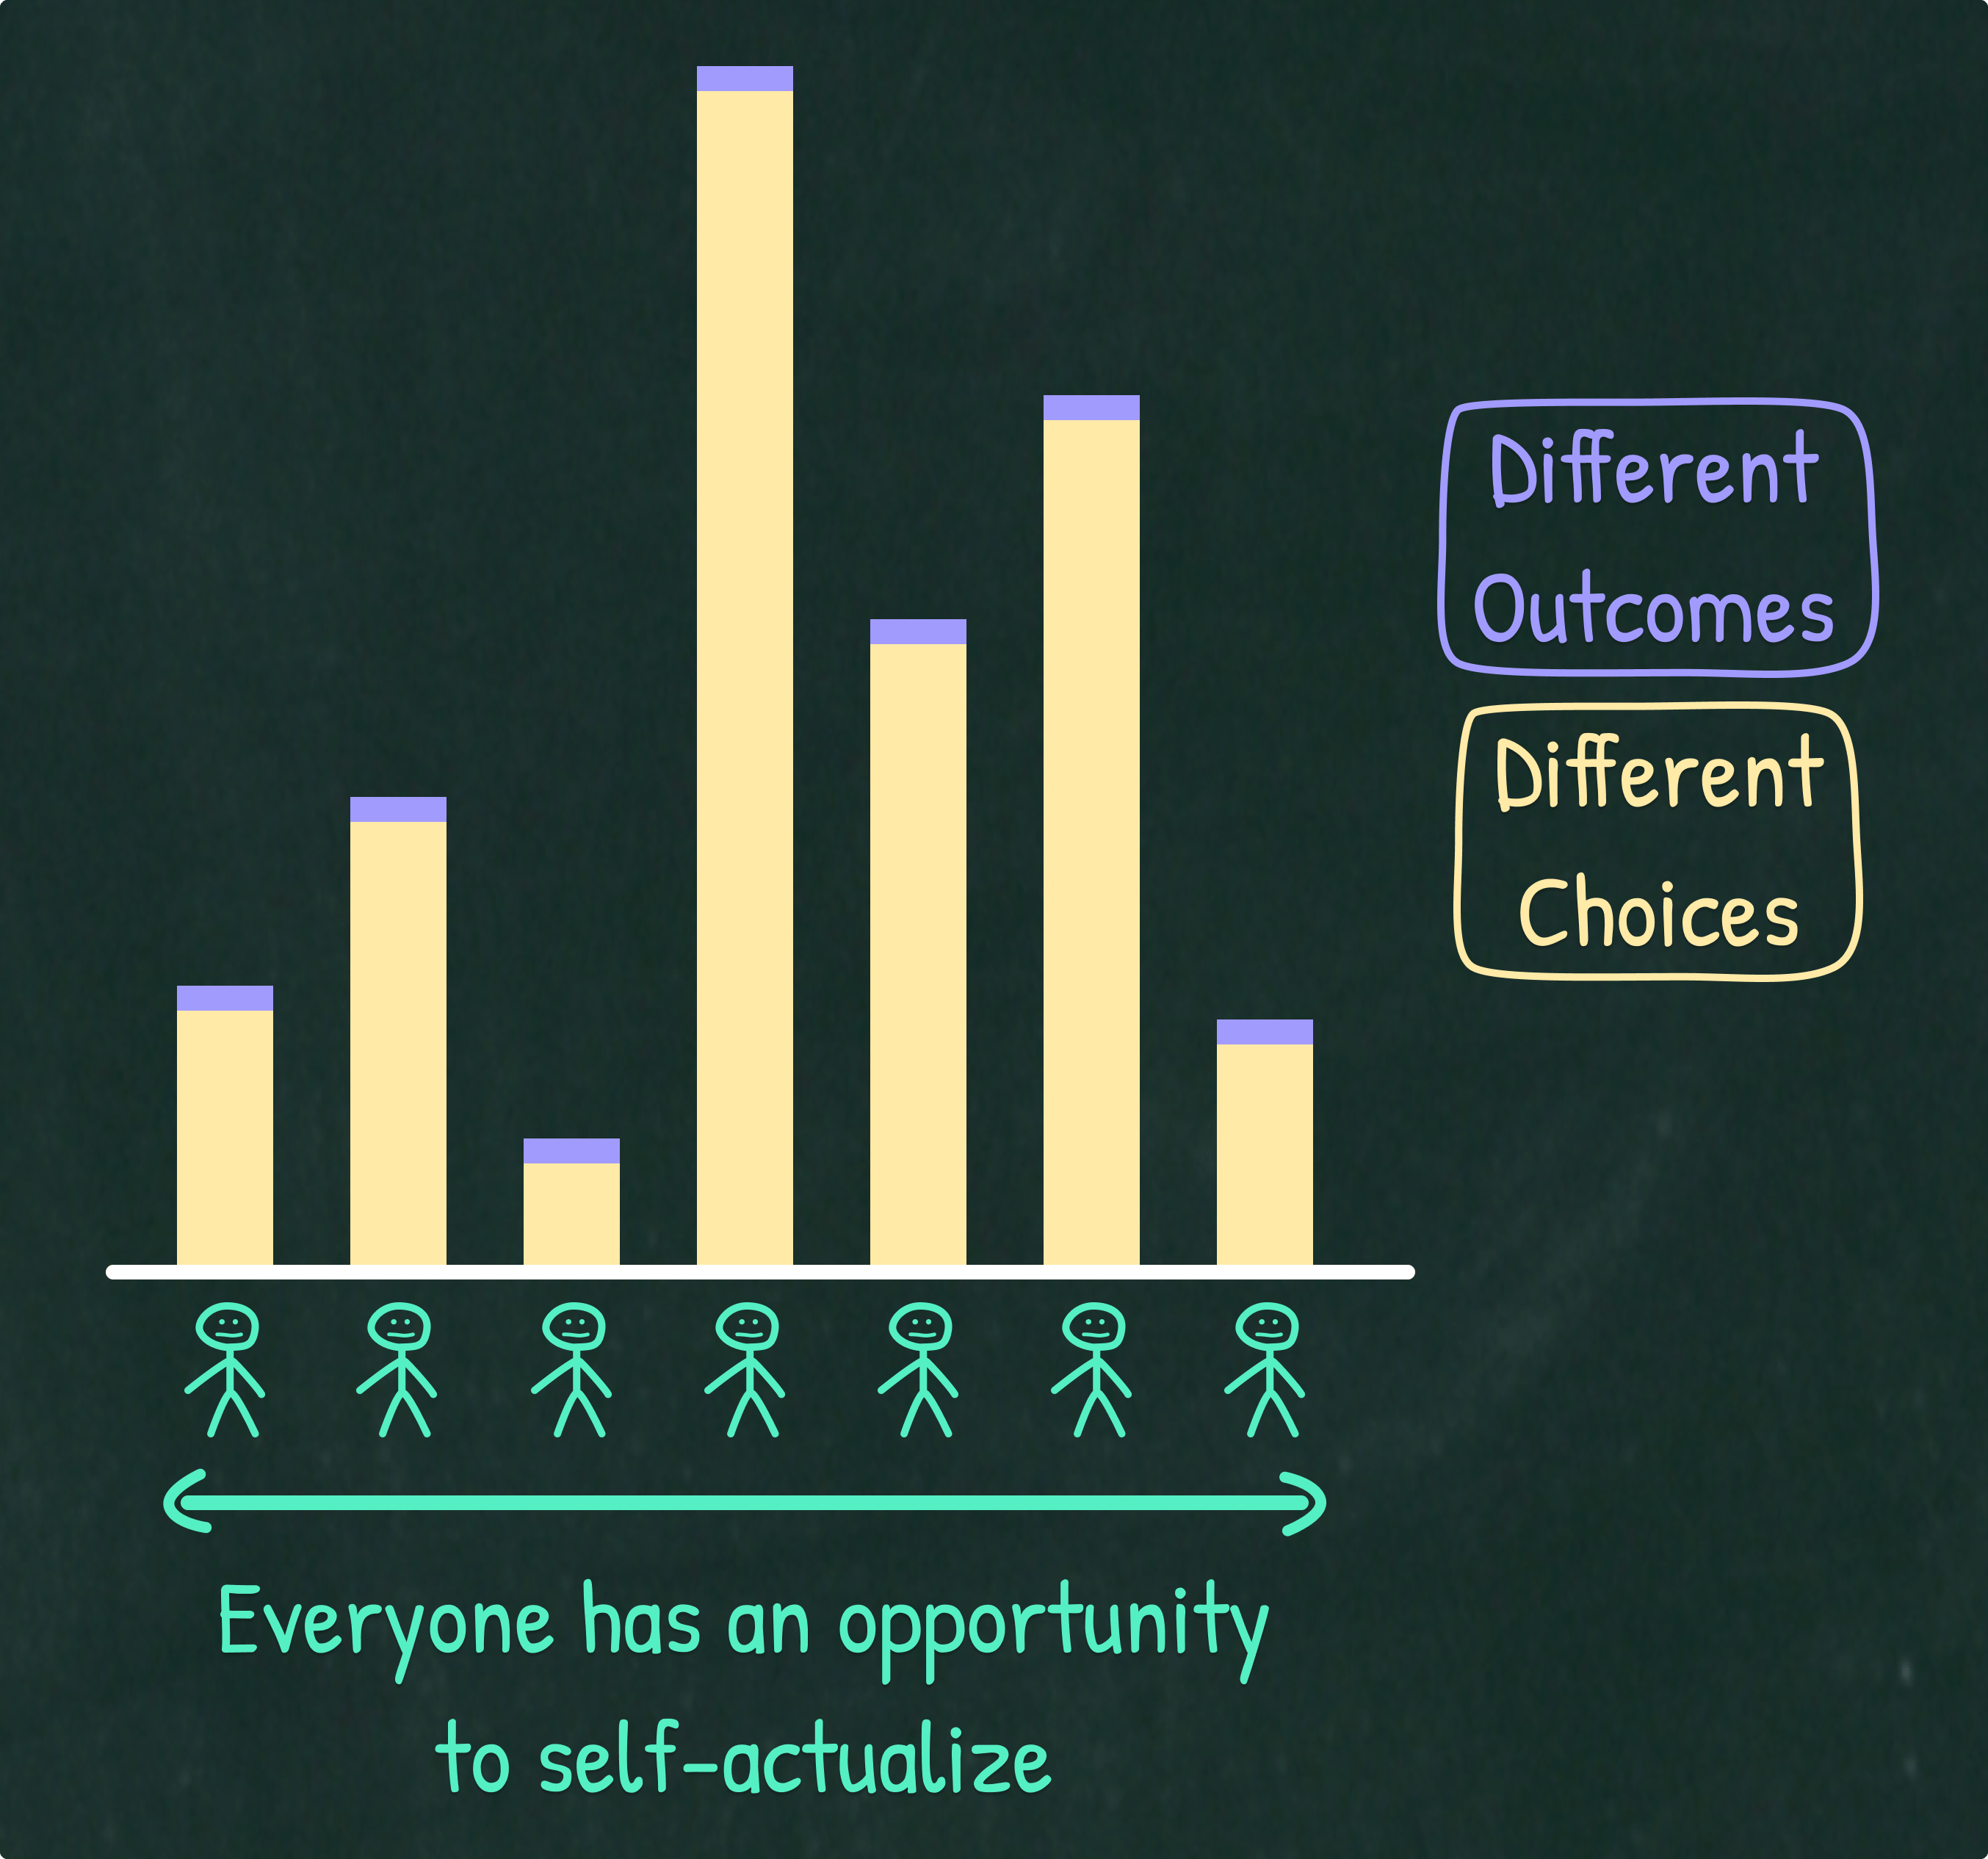 Illustration shows how when people get an opportunity to self-actualize, they make different choices and thus achieve different outcomes